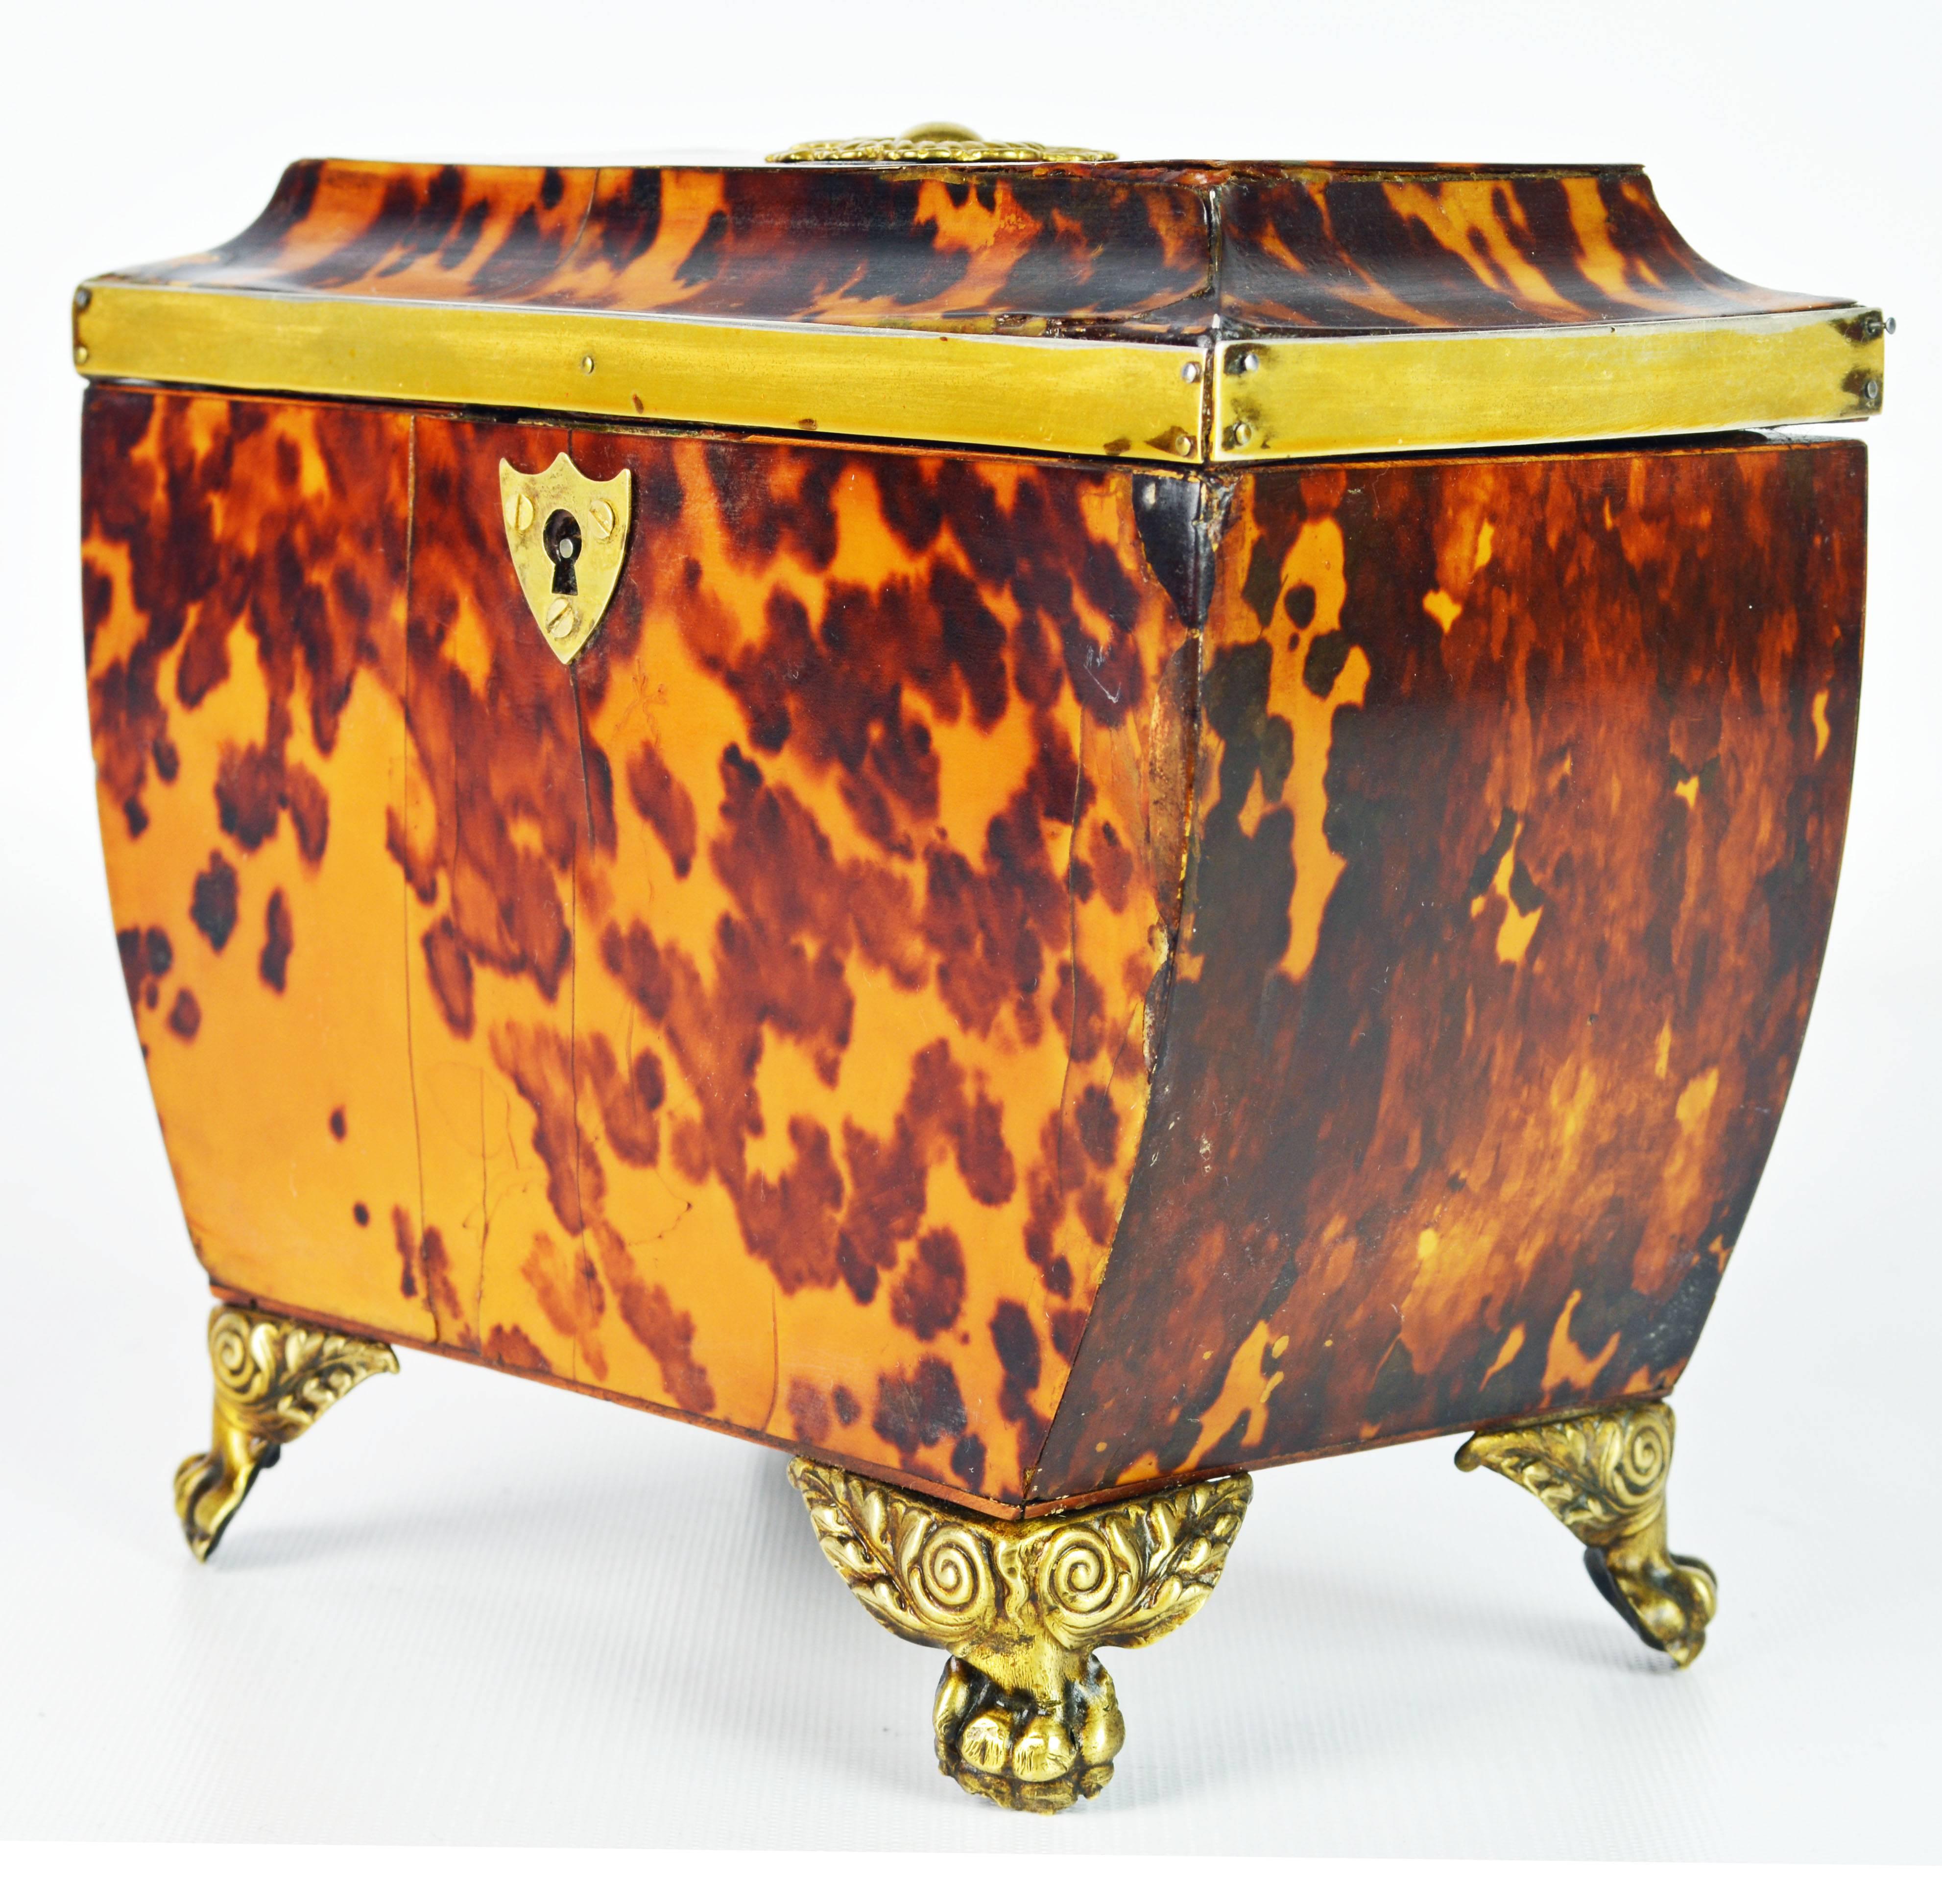 19th Century Lovely English Regency Tortoiseshell Footed Tea Caddy with Intach Interior